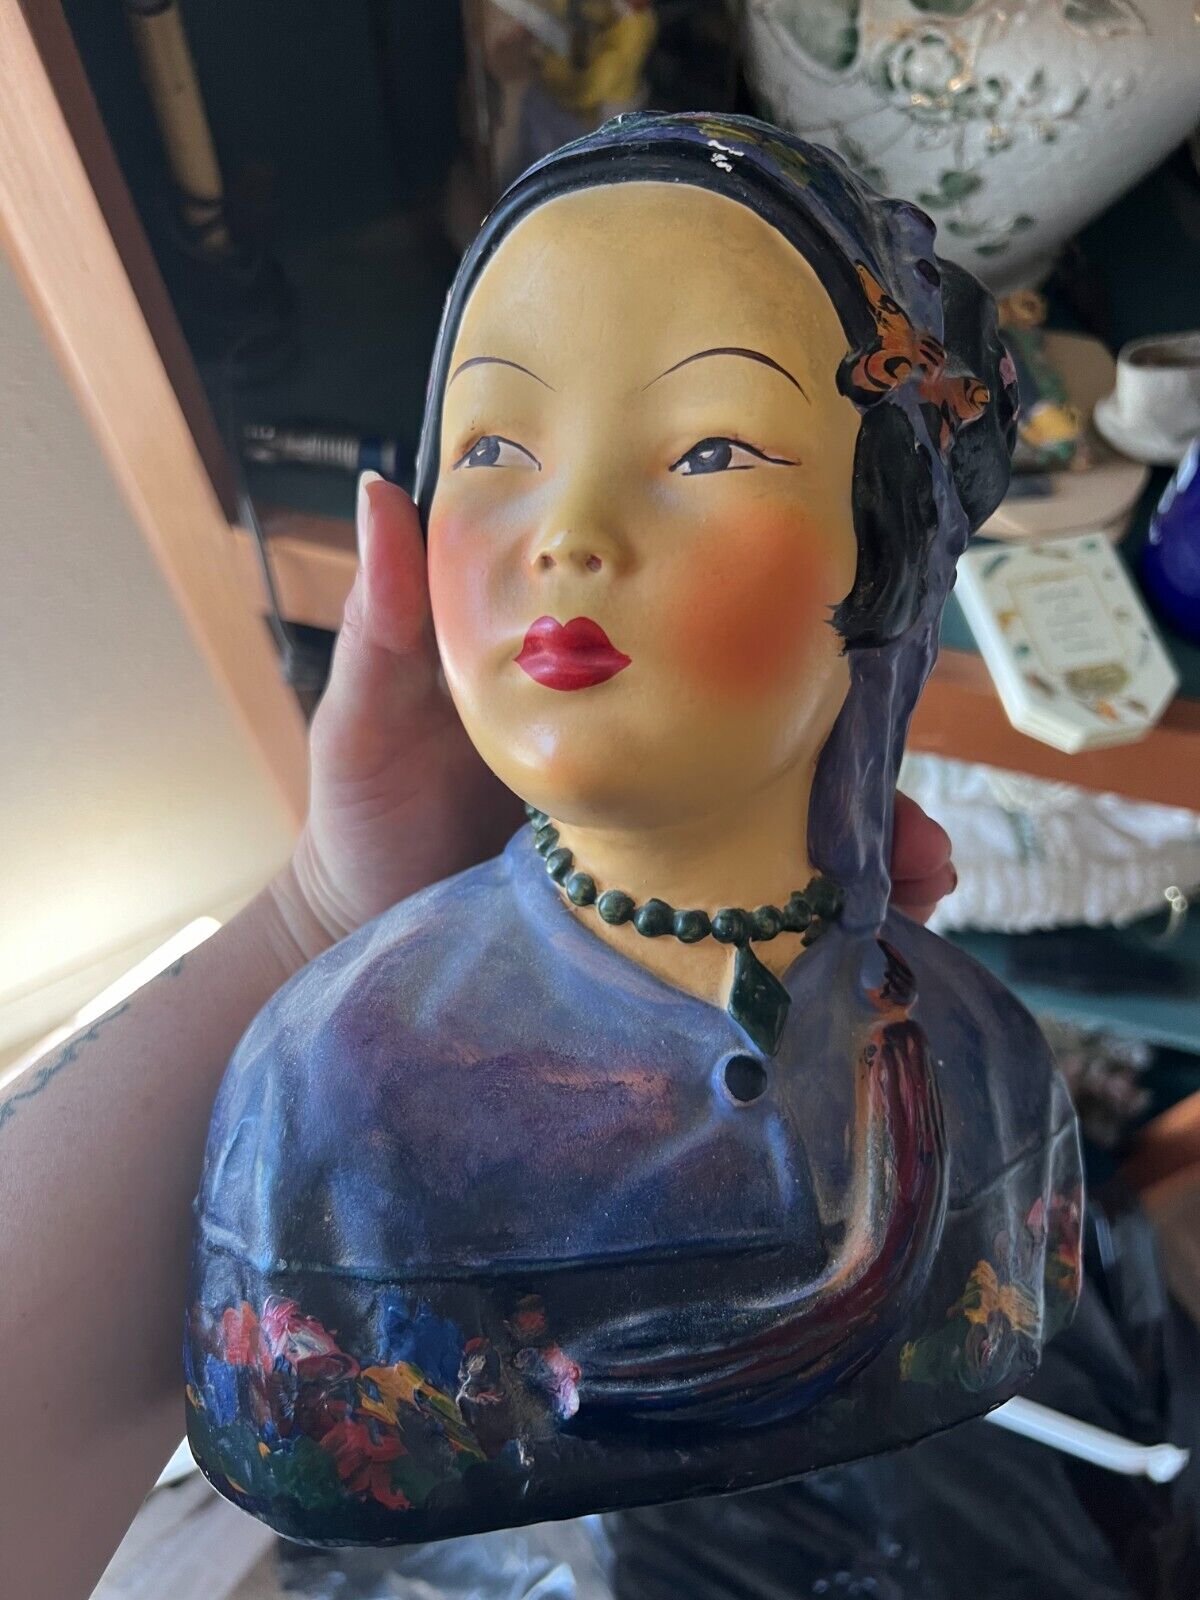 Rare Find Joe Celona Chalkware Bust of Esther Hunt 1923 - Excellent Condition